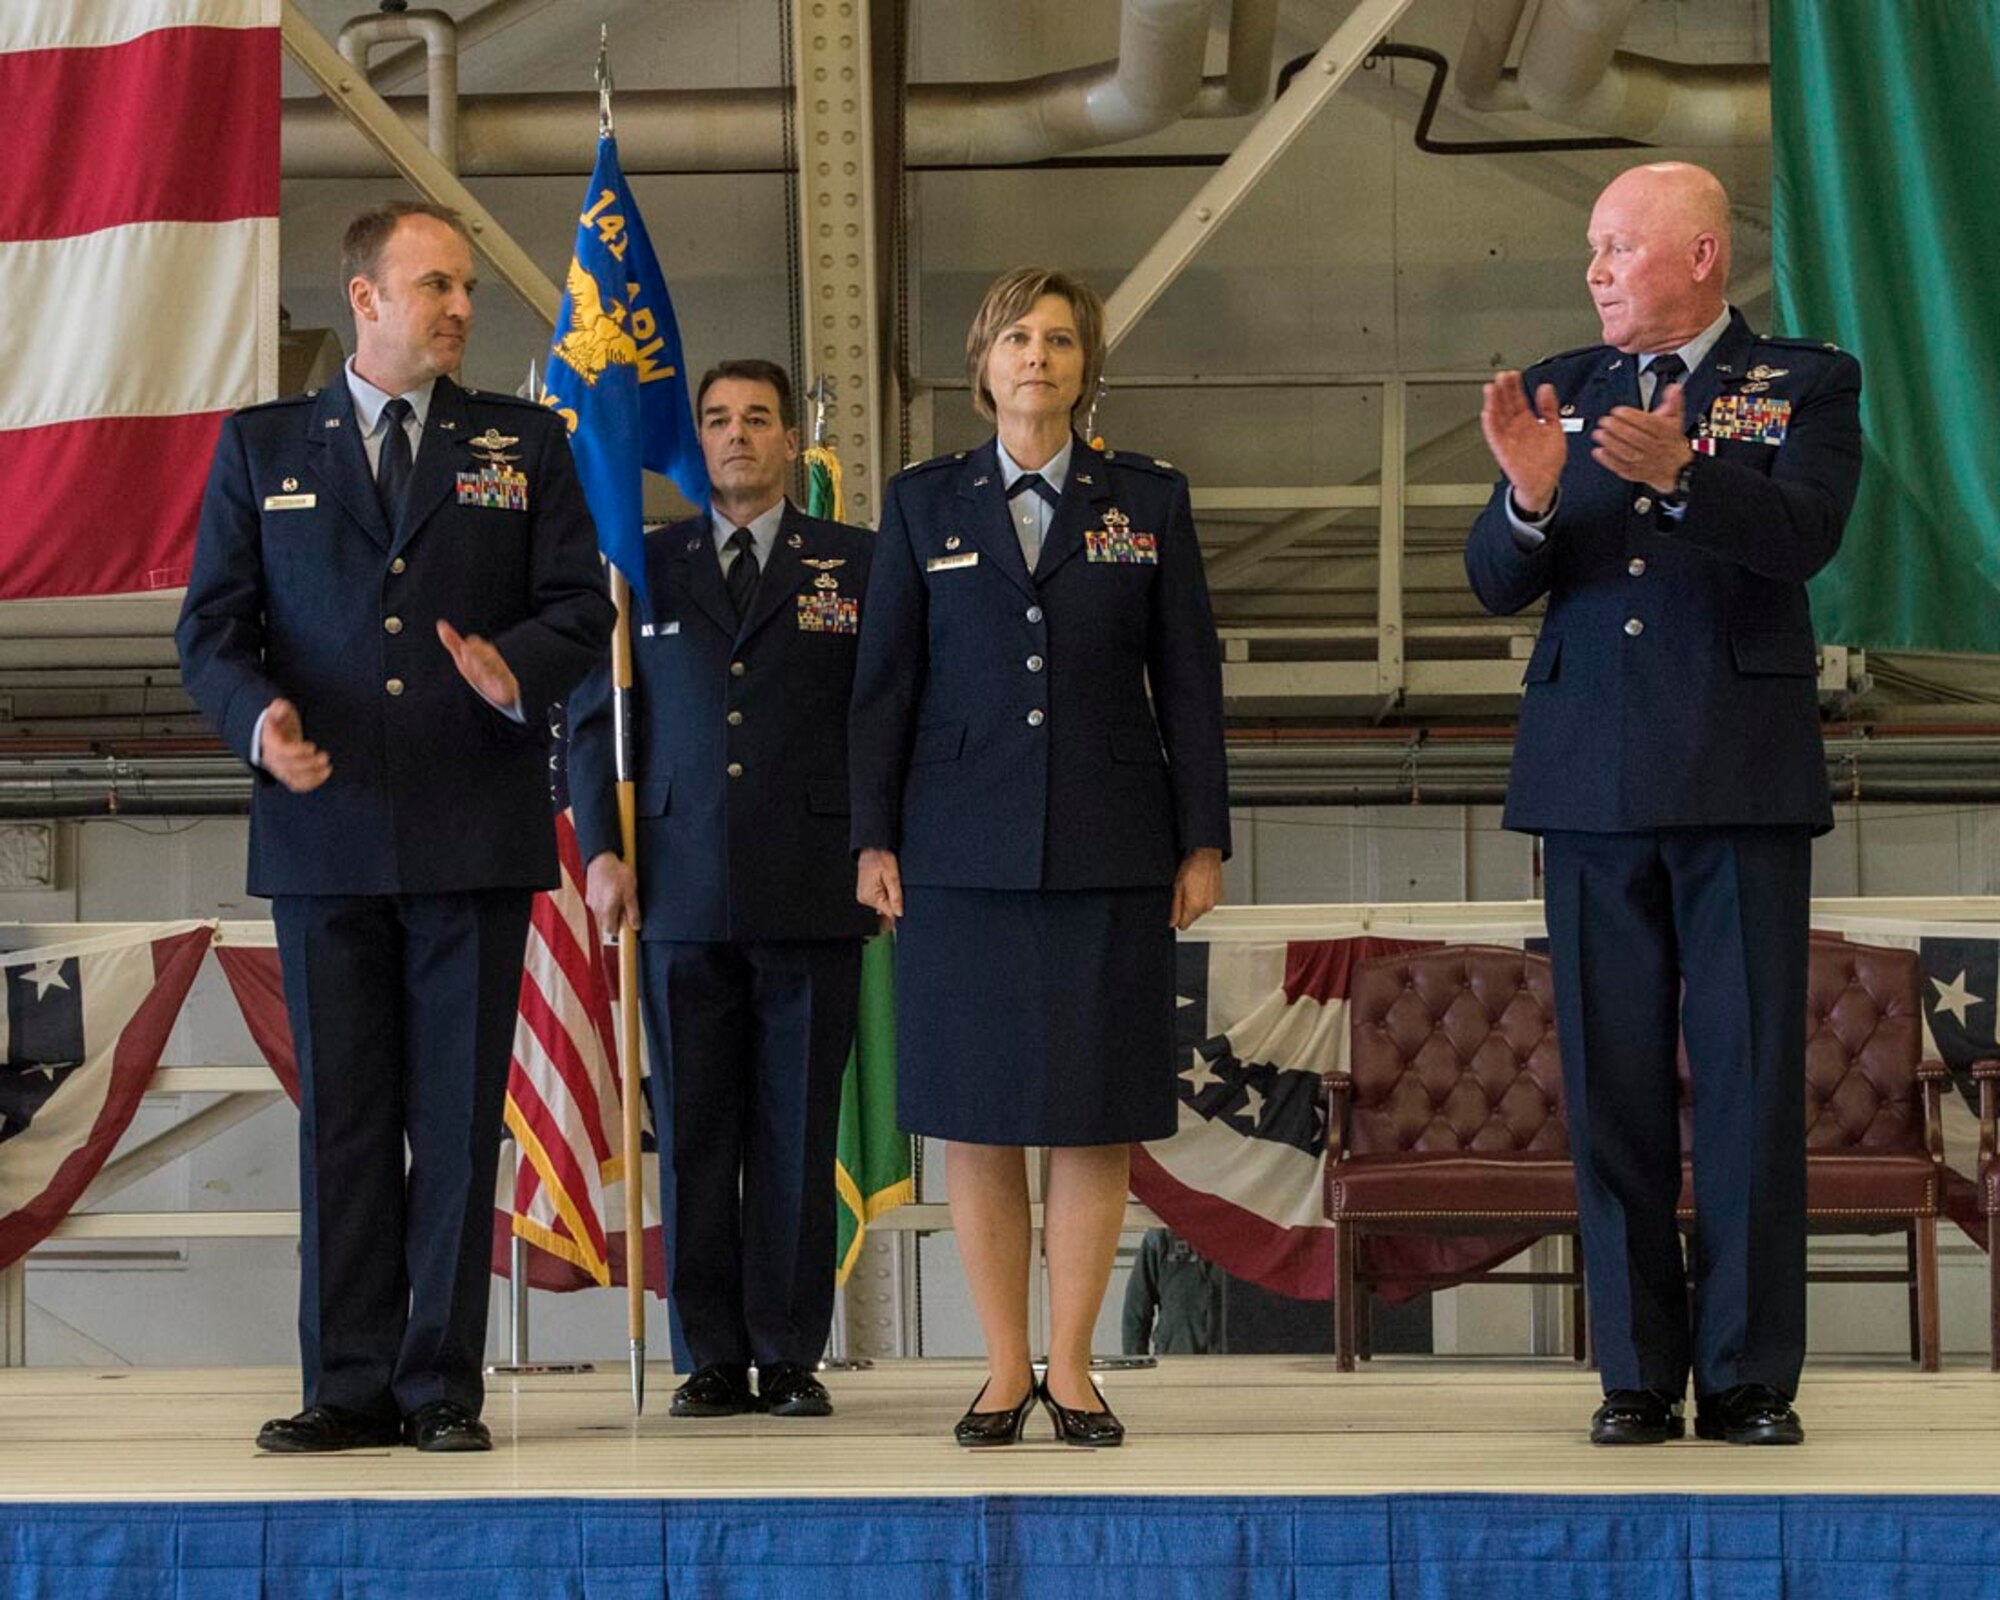 Lt. Col. Lisa McLeod (center), 141st Maintenance Group commander, assumed command of the 141st MXG from Col. David Dixon (right), during a change of command ceremony Jan. 6, 2018, at Fairchild Air Force Base, Washington. McLeod assumed command after serving as the 141st MXG deputy commander. Col. Johan Deutscher (left), 141st Air Refueling Wing commander, presided over the ceremony. (U.S. Air National Guard photo/Staff Sgt. Rose Lust)